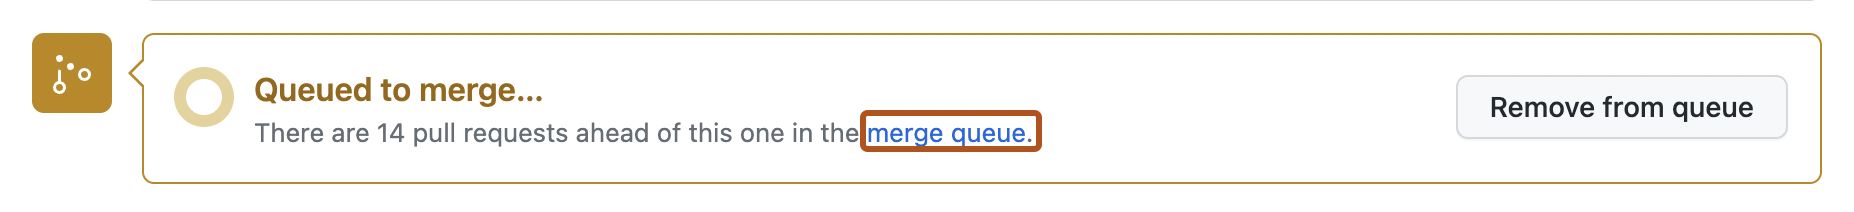 Merge queue link on pull request